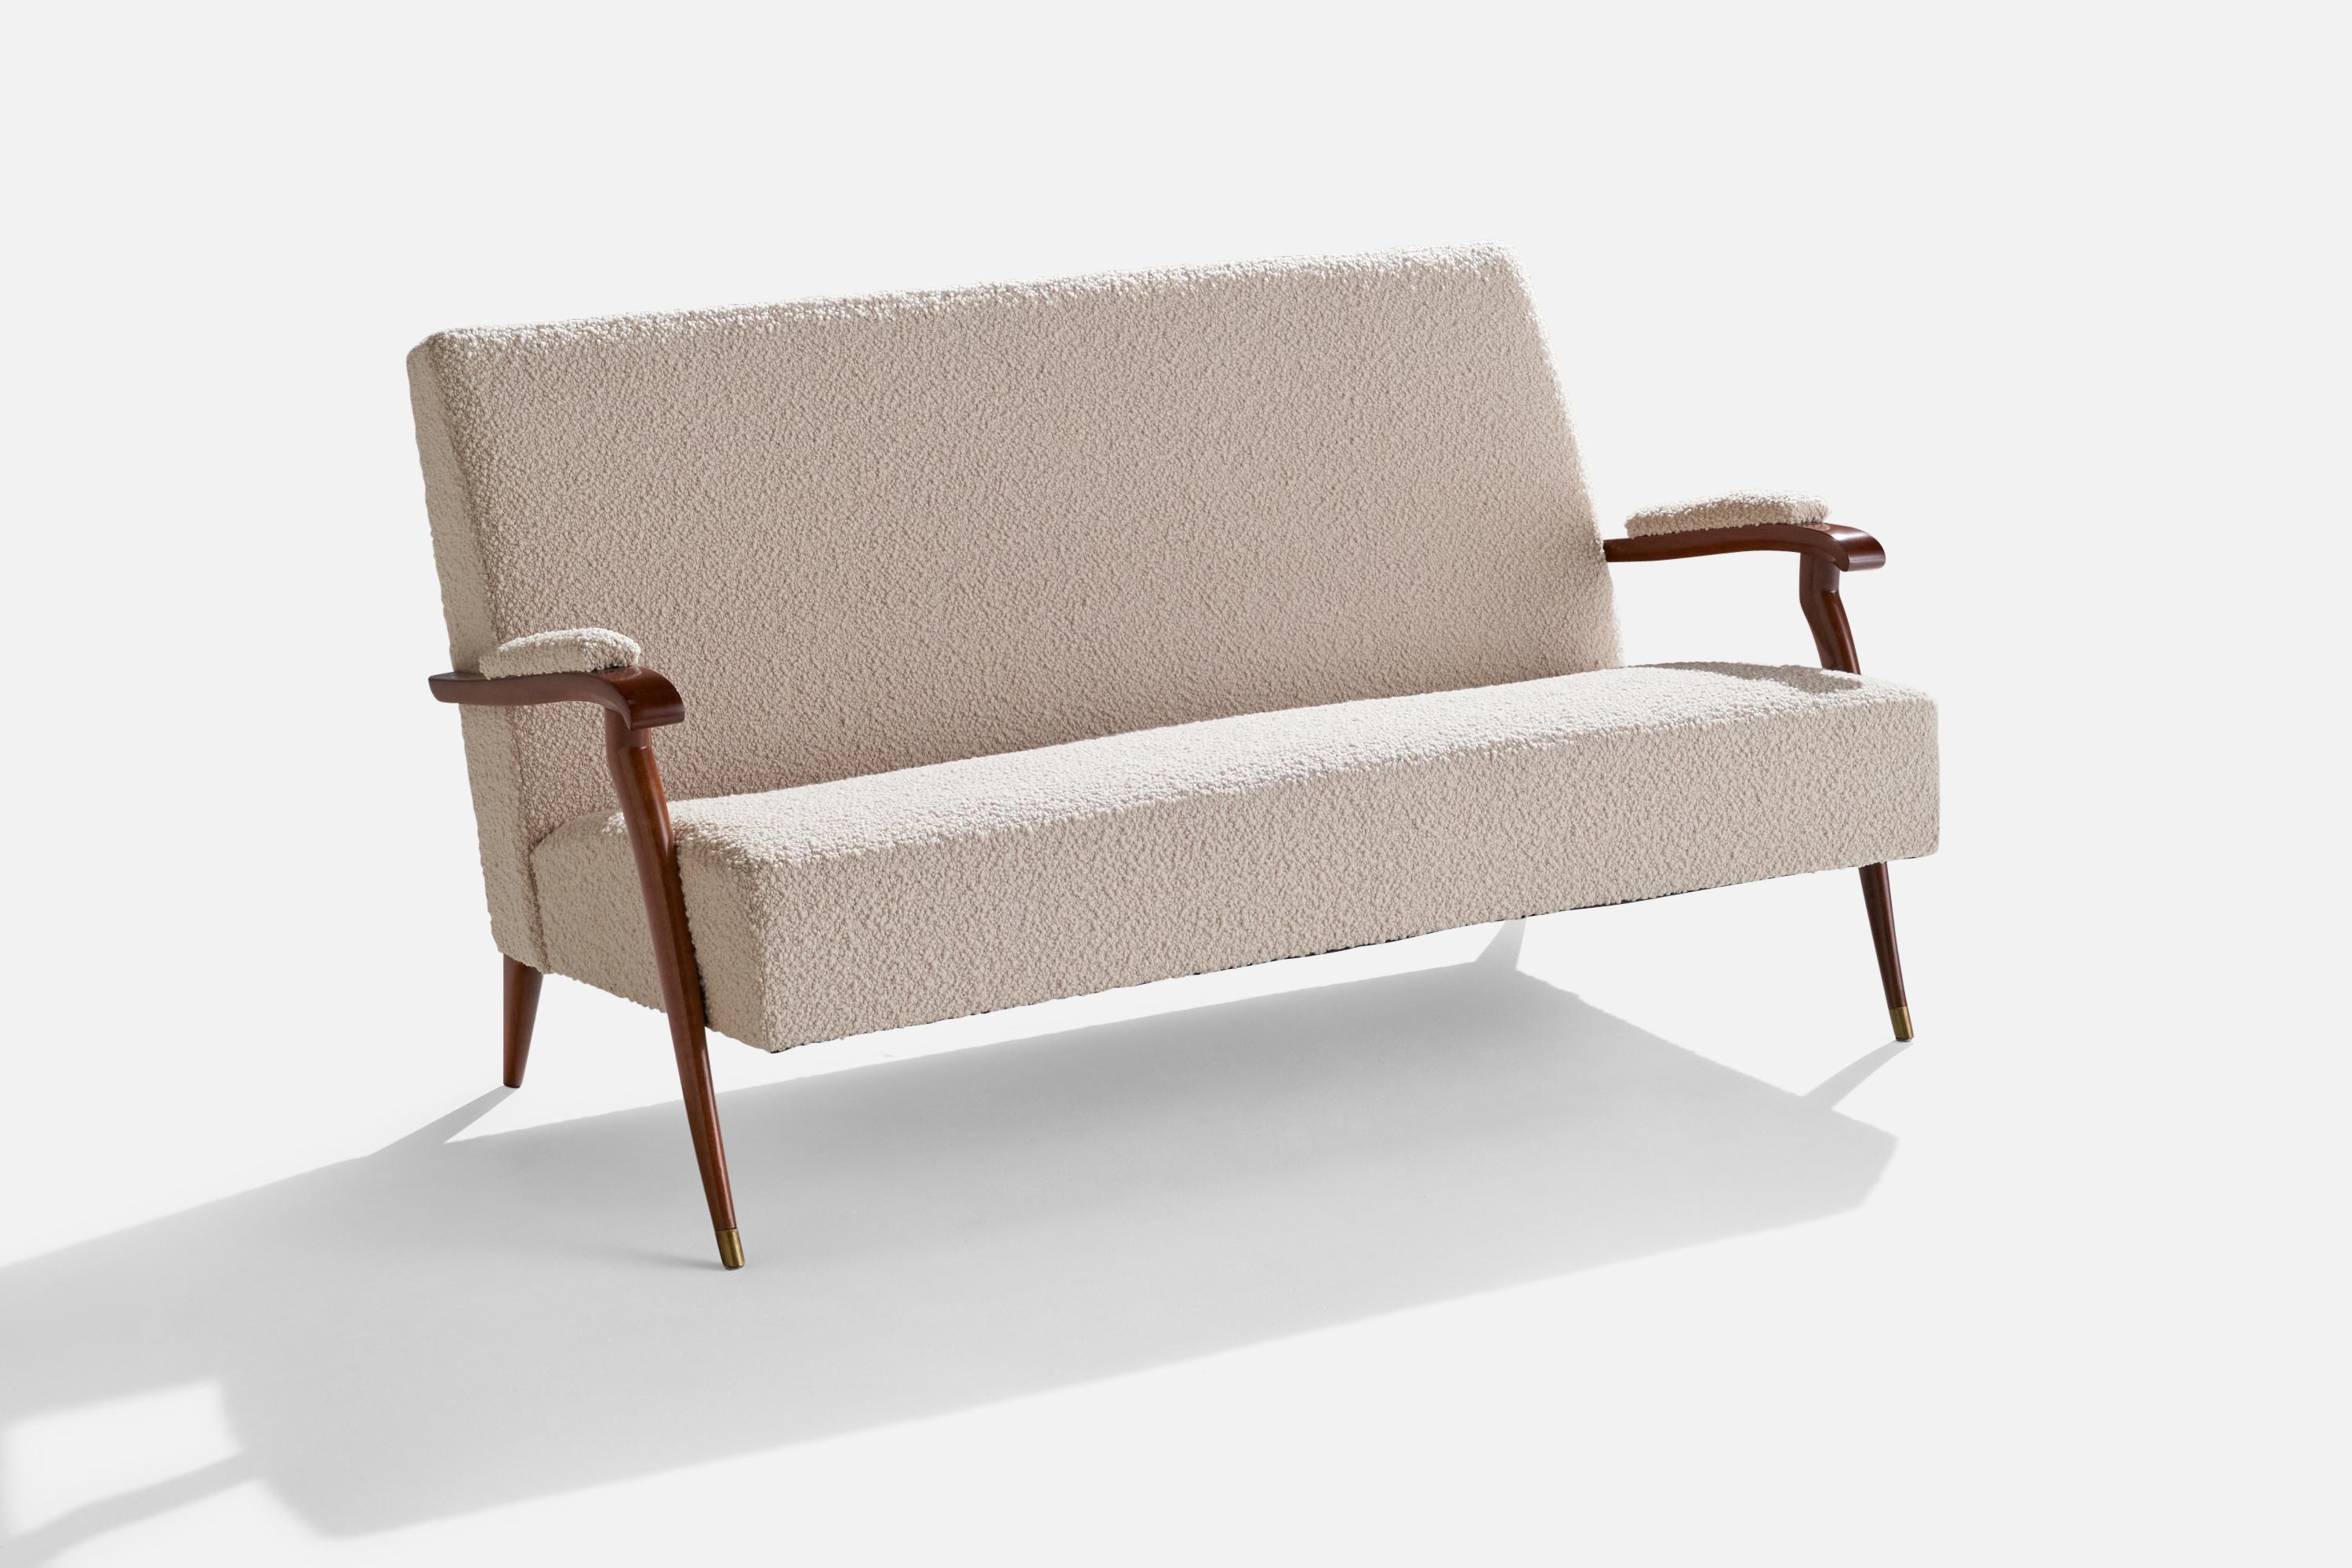 A mahogany, brass and bouclé fabric sofa or settee designed and produced by Jules Leleu, France, 1960s.

Literature: Sirex, The House of Leleu, 2008, p. 327.

seat height 15.5”.

Reupholstered in brand new bouclé fabric.
 